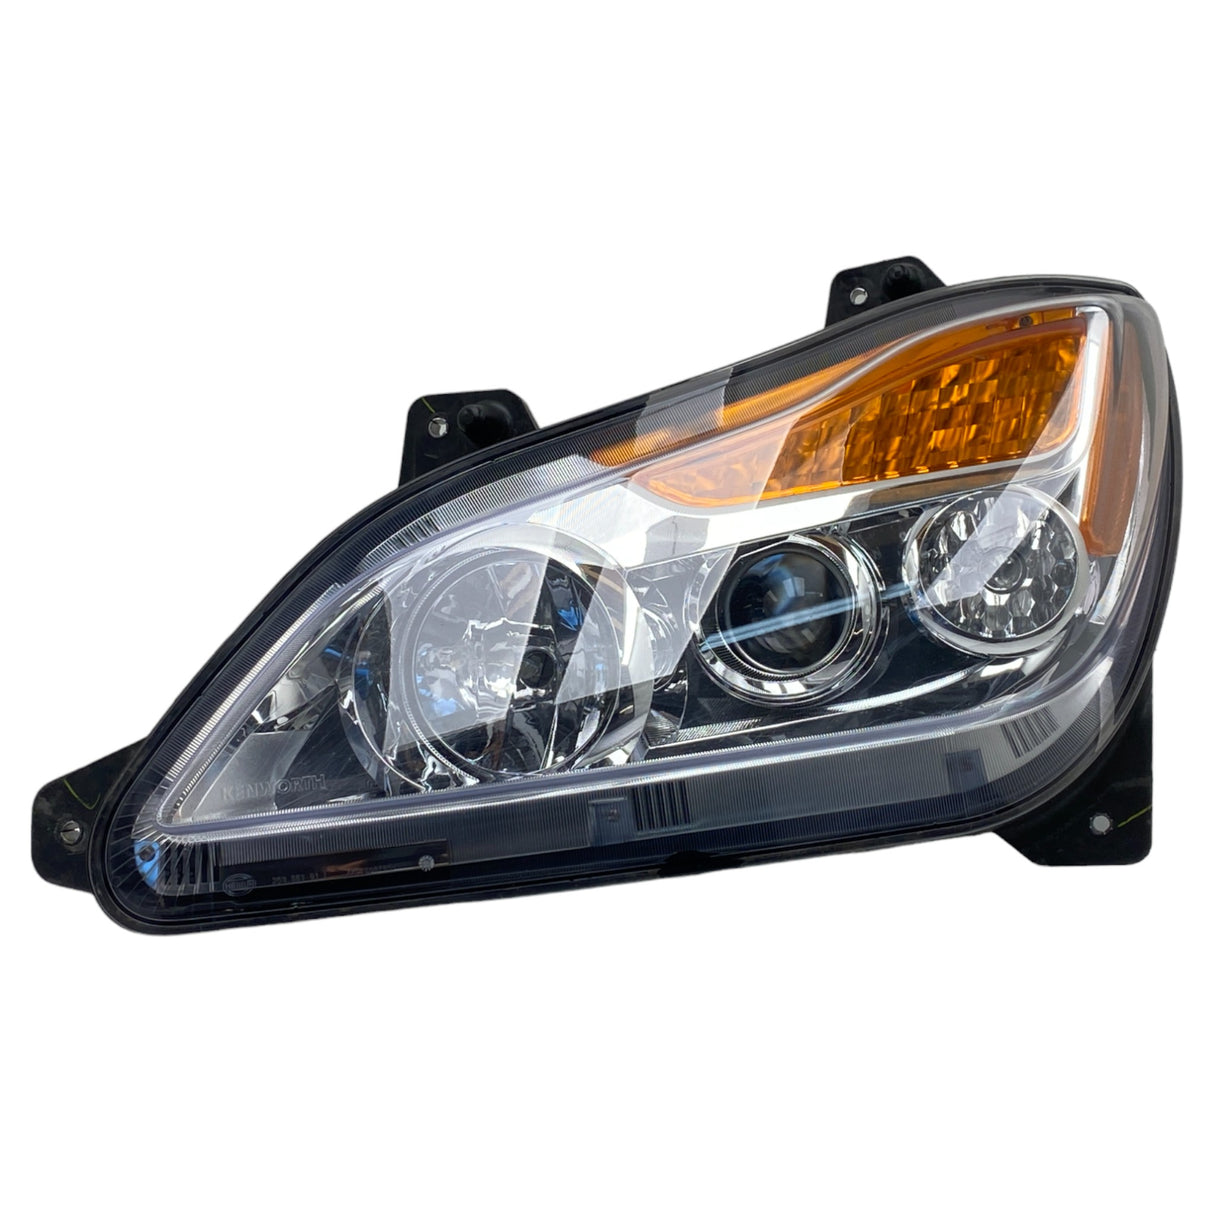 P54-6156-100 Genuine Paccar Left Driver Side Headlamp Assembly